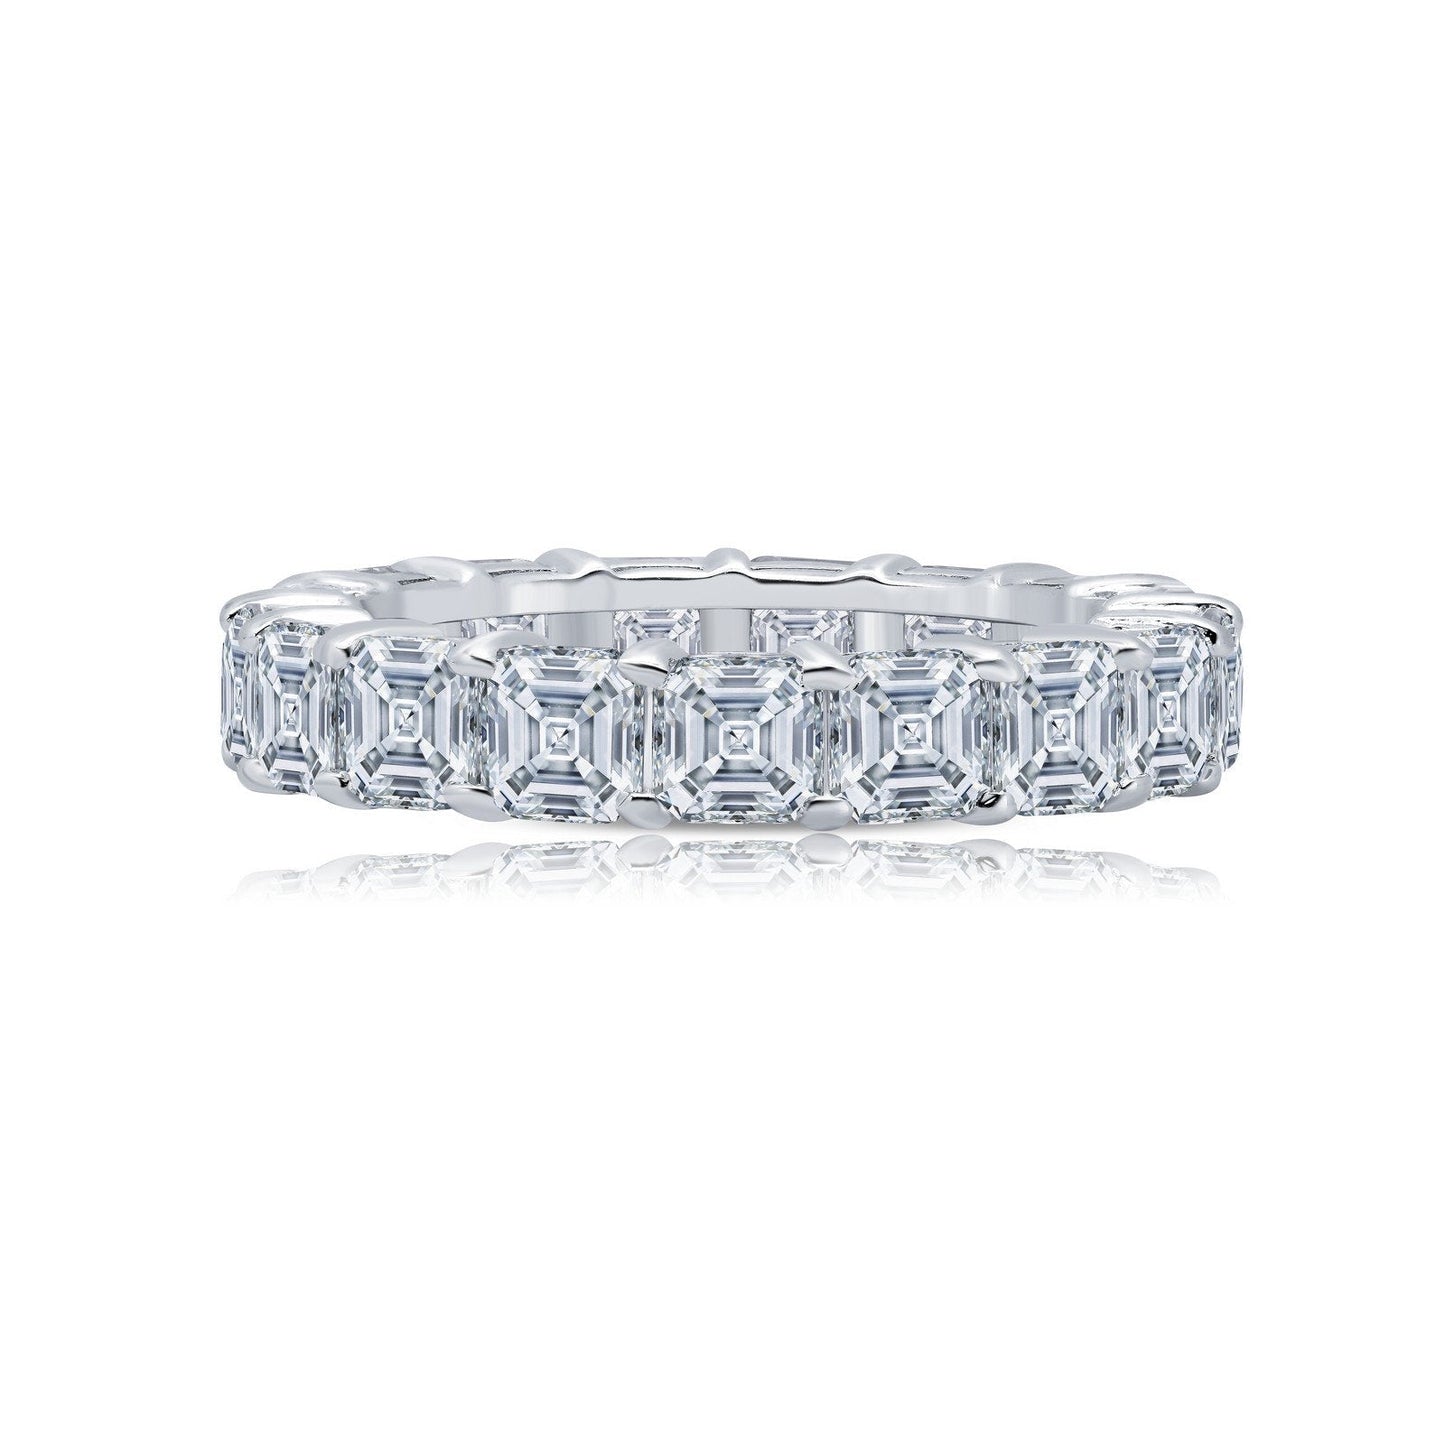 Lafonn 6.63 CTW Anniversary Eternity Band Simulated Diamond RINGS Size 9 Platinum 6.63 CTS Approx. 4mm (W)